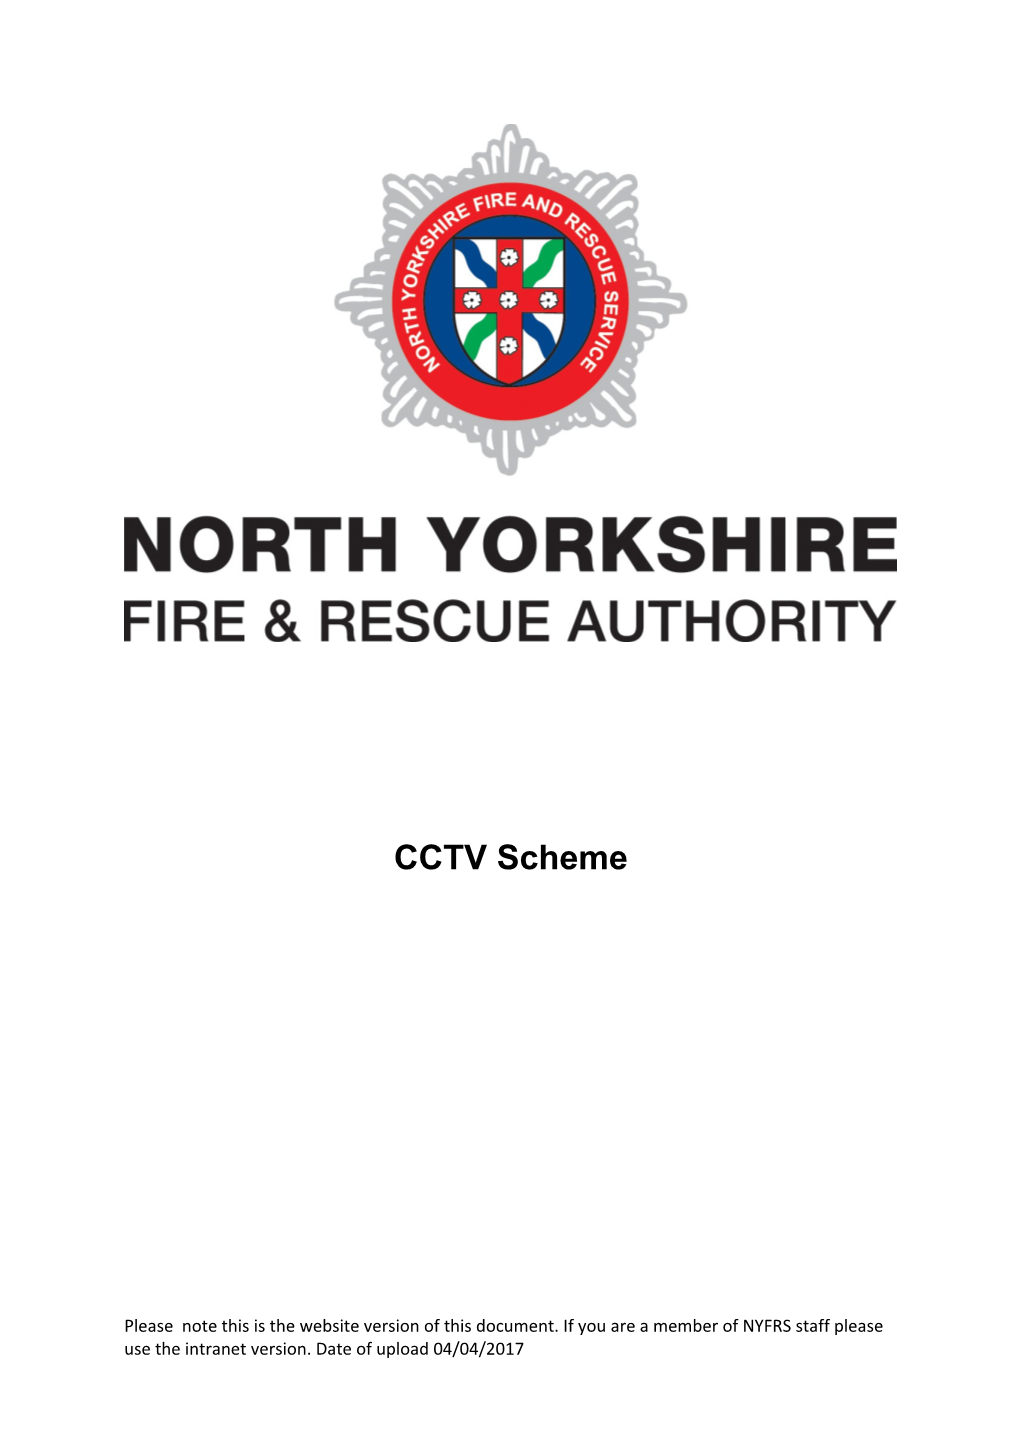 NYFRS Own and Operate CCTV Systems for the Purpose Of